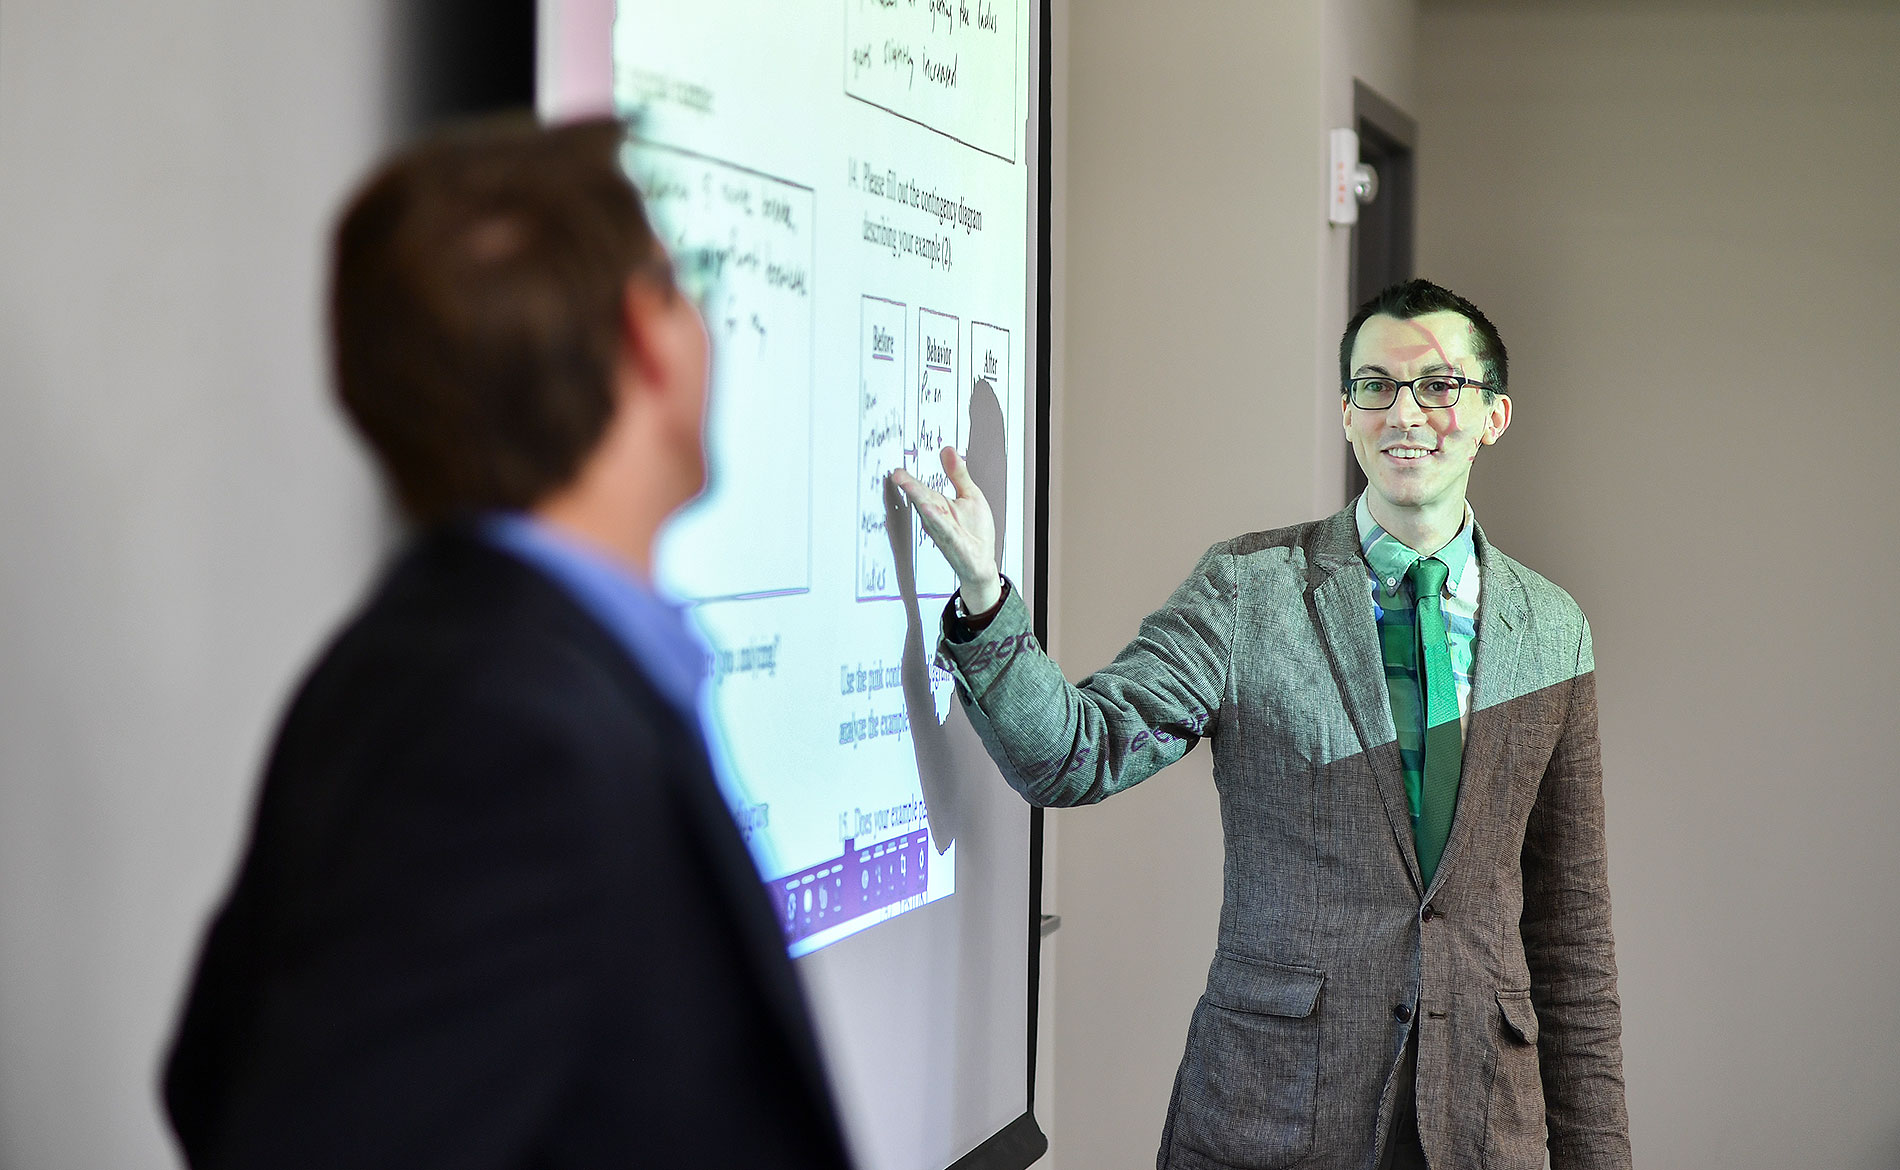 two students presenting and pointing at a projection screen